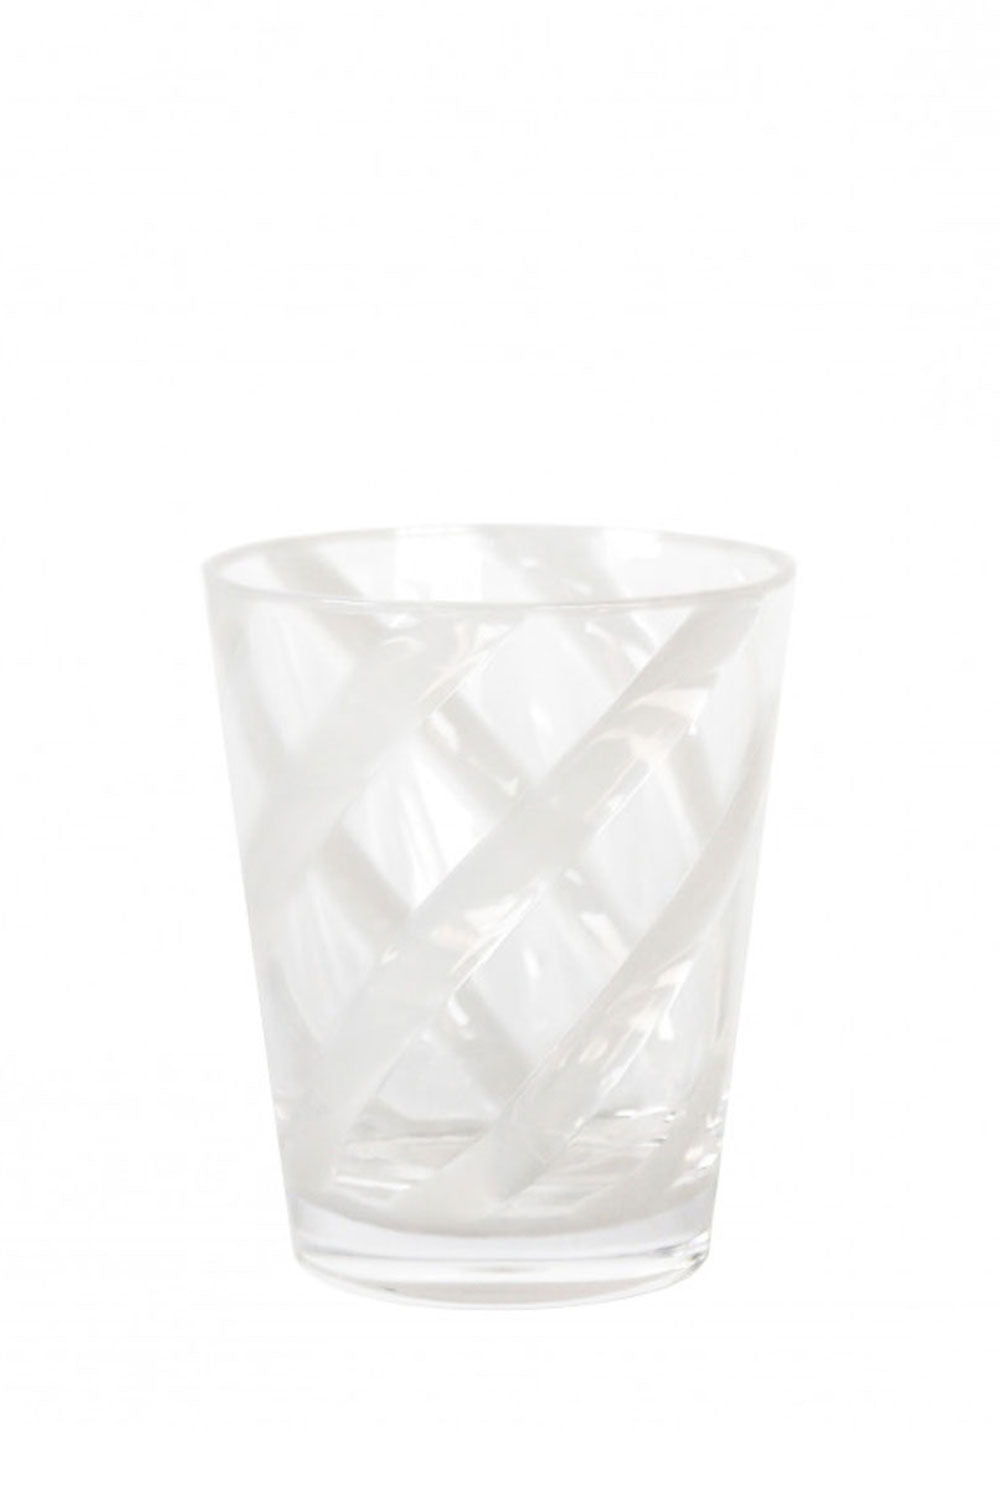 Methacrylate Tumbler with White Spiral